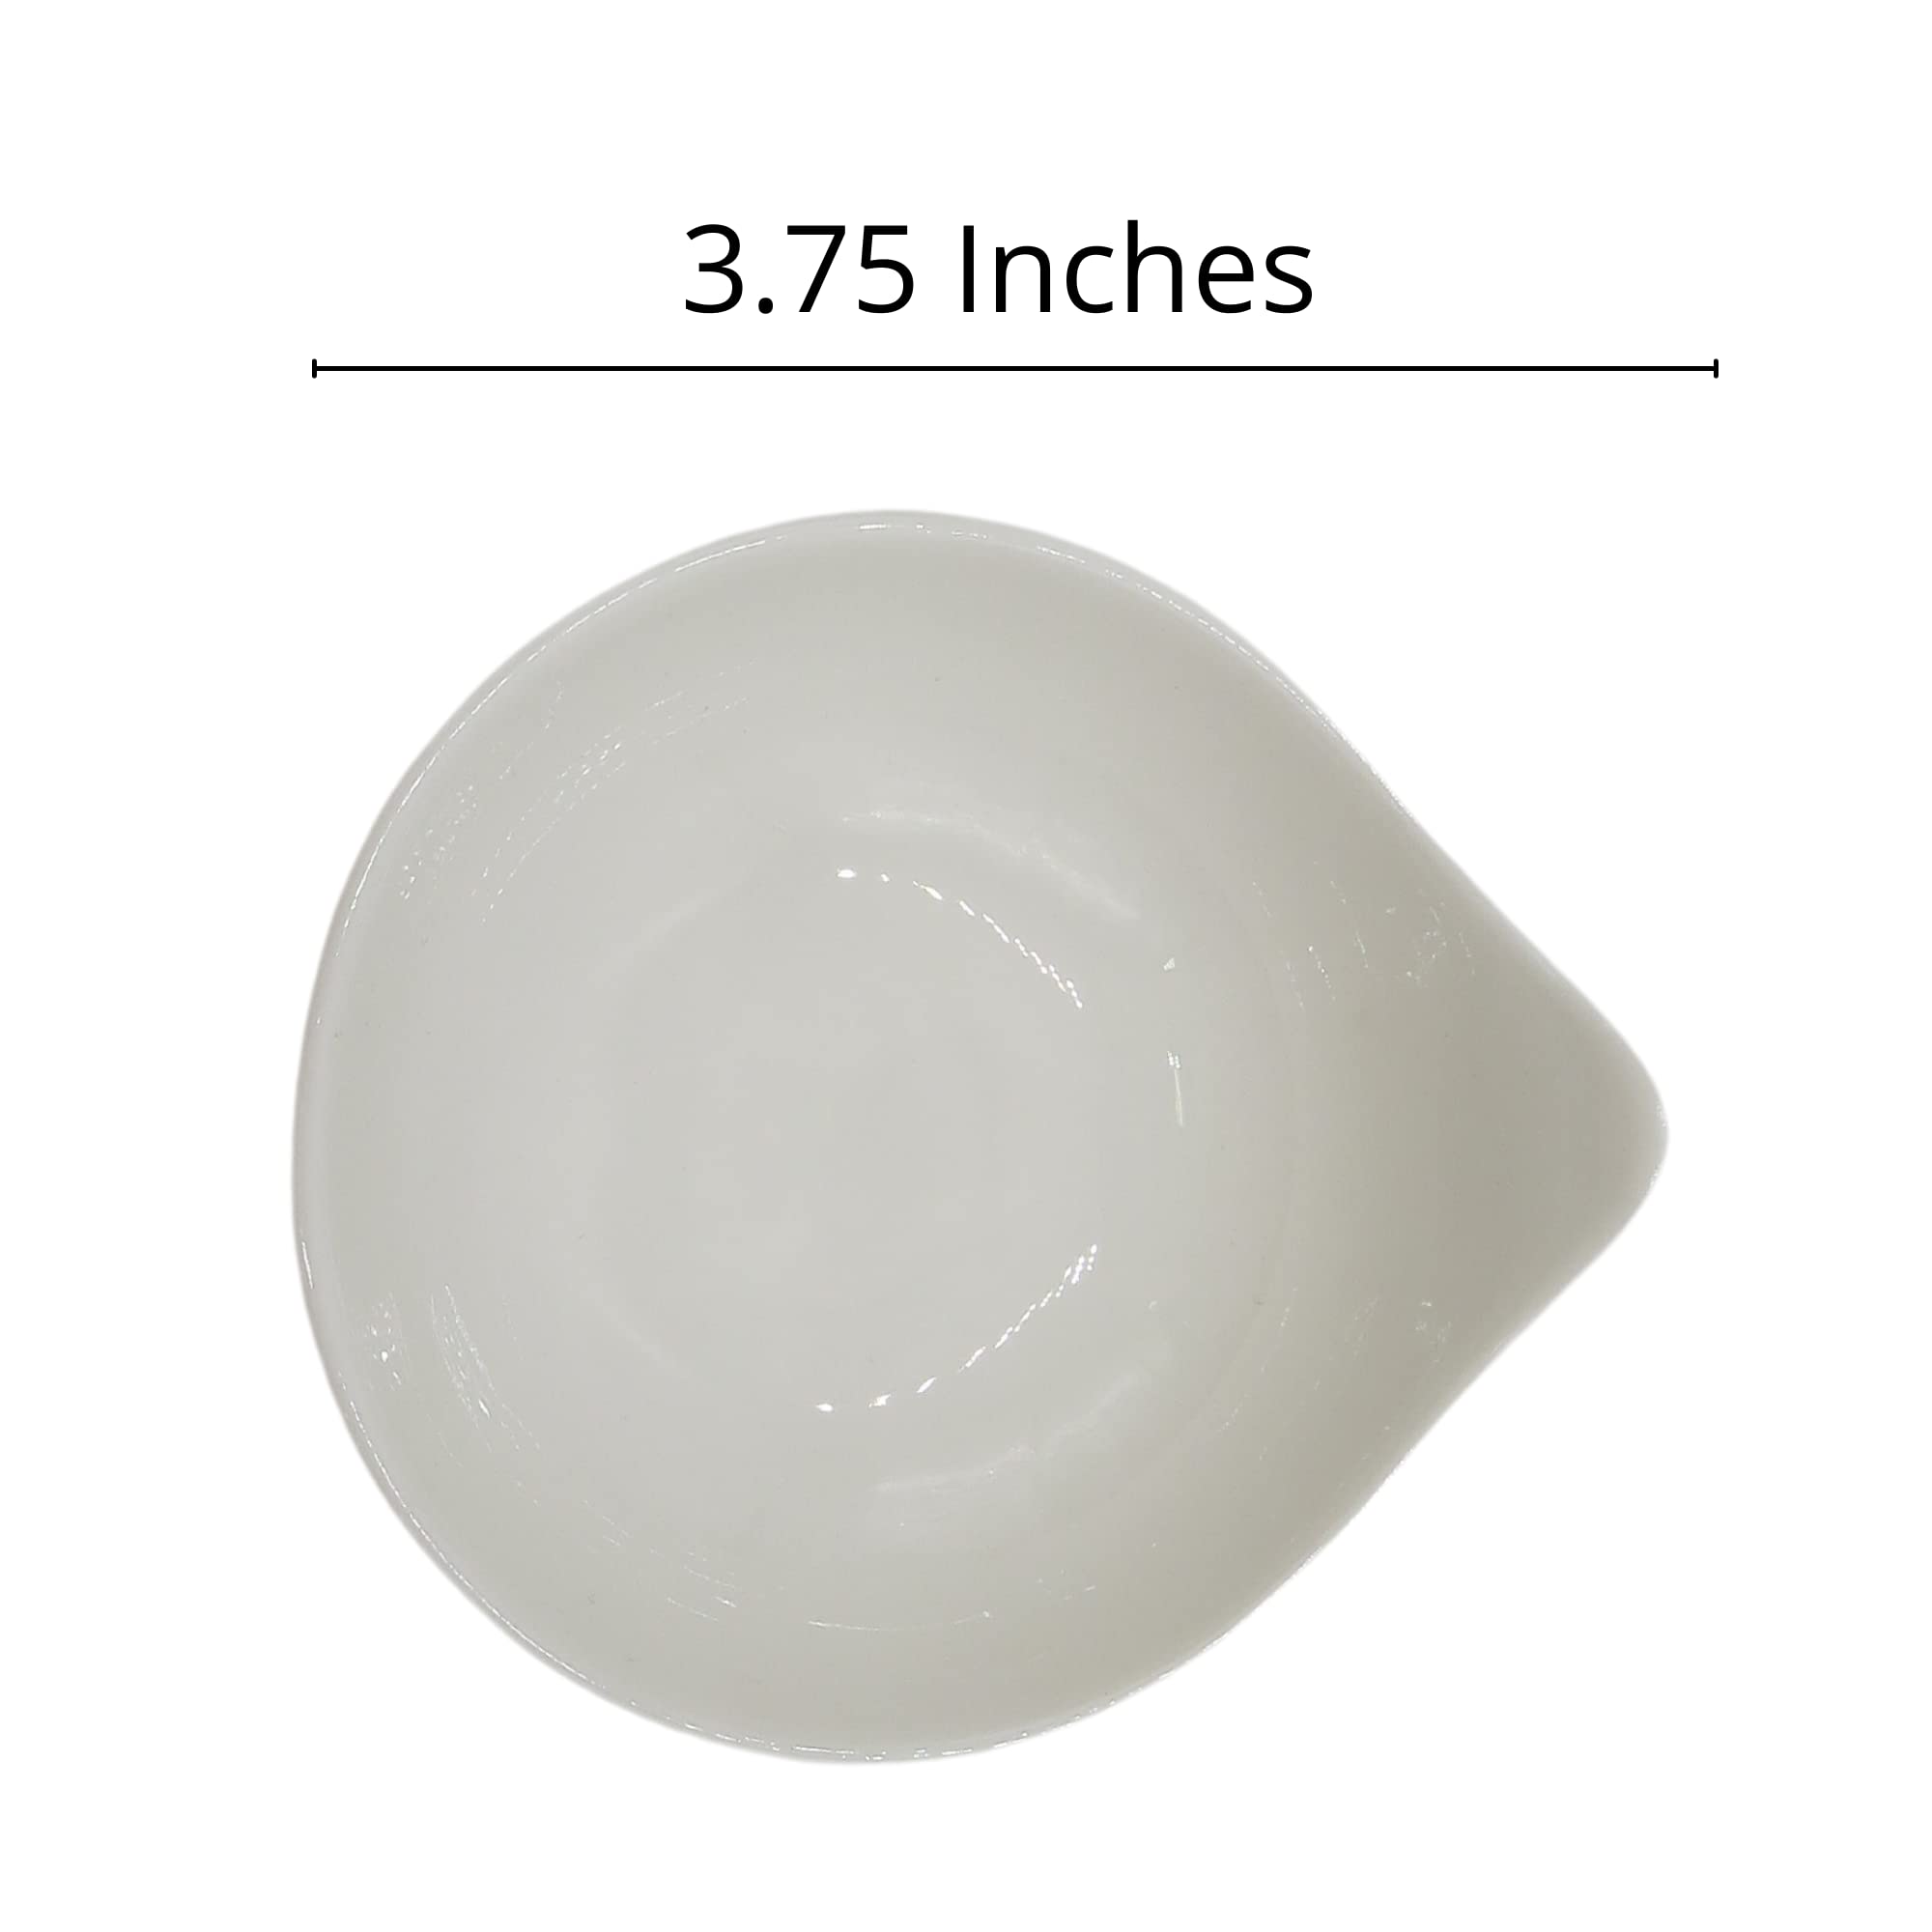 Needzo White Melamine French Onion Soup Bowls, Microwave Safe Bowl for Soups, Stews, Chilis, Baked Beans, and More, Set of 2